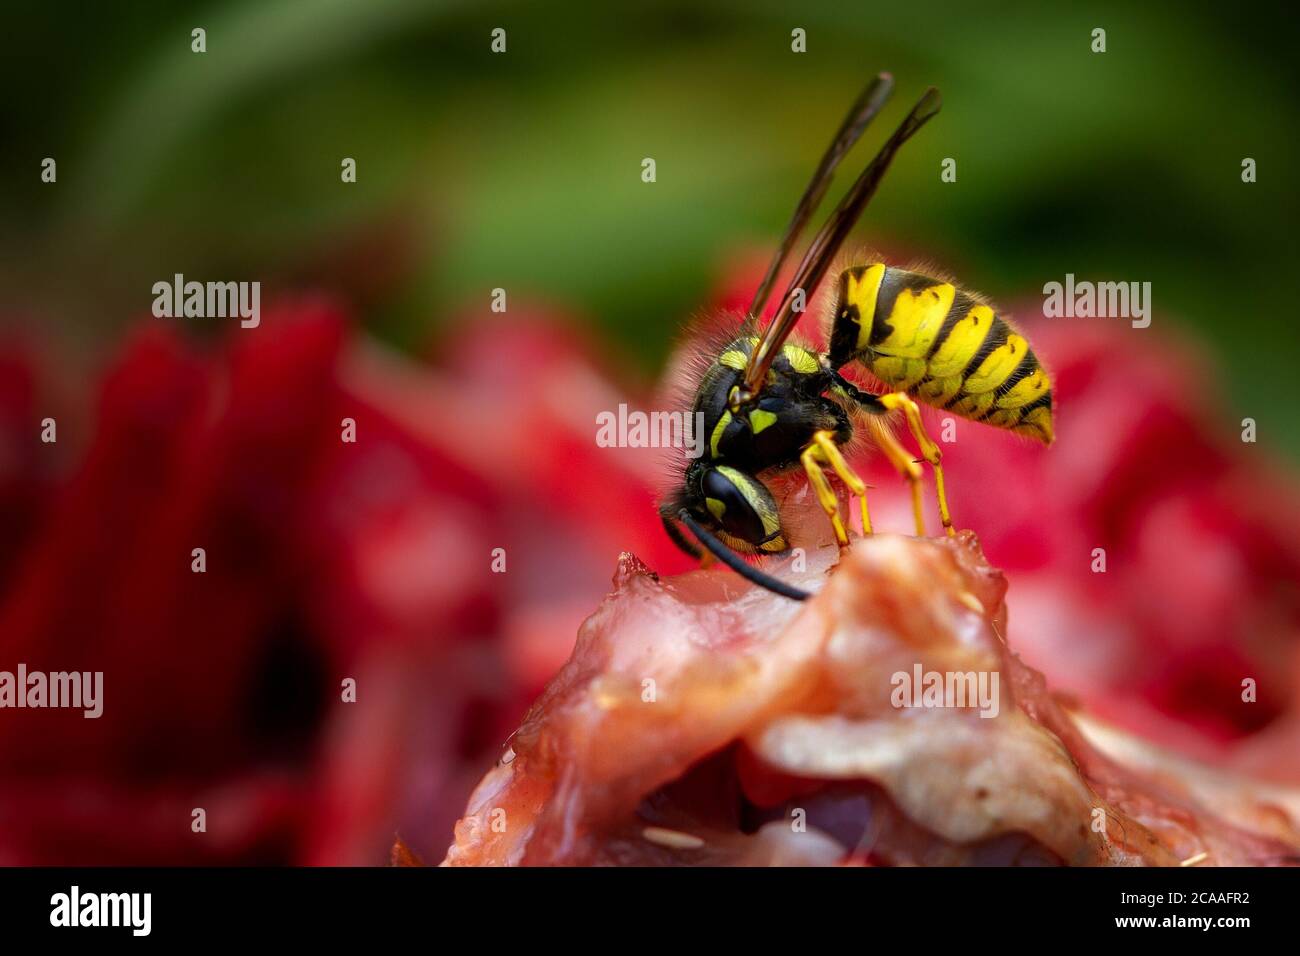 UK wildlife: Male social wasp (Vespula vulgaris) chopping up meat from a rabbit carcass to take back to the nest to feed its carnivorous young. Stock Photo